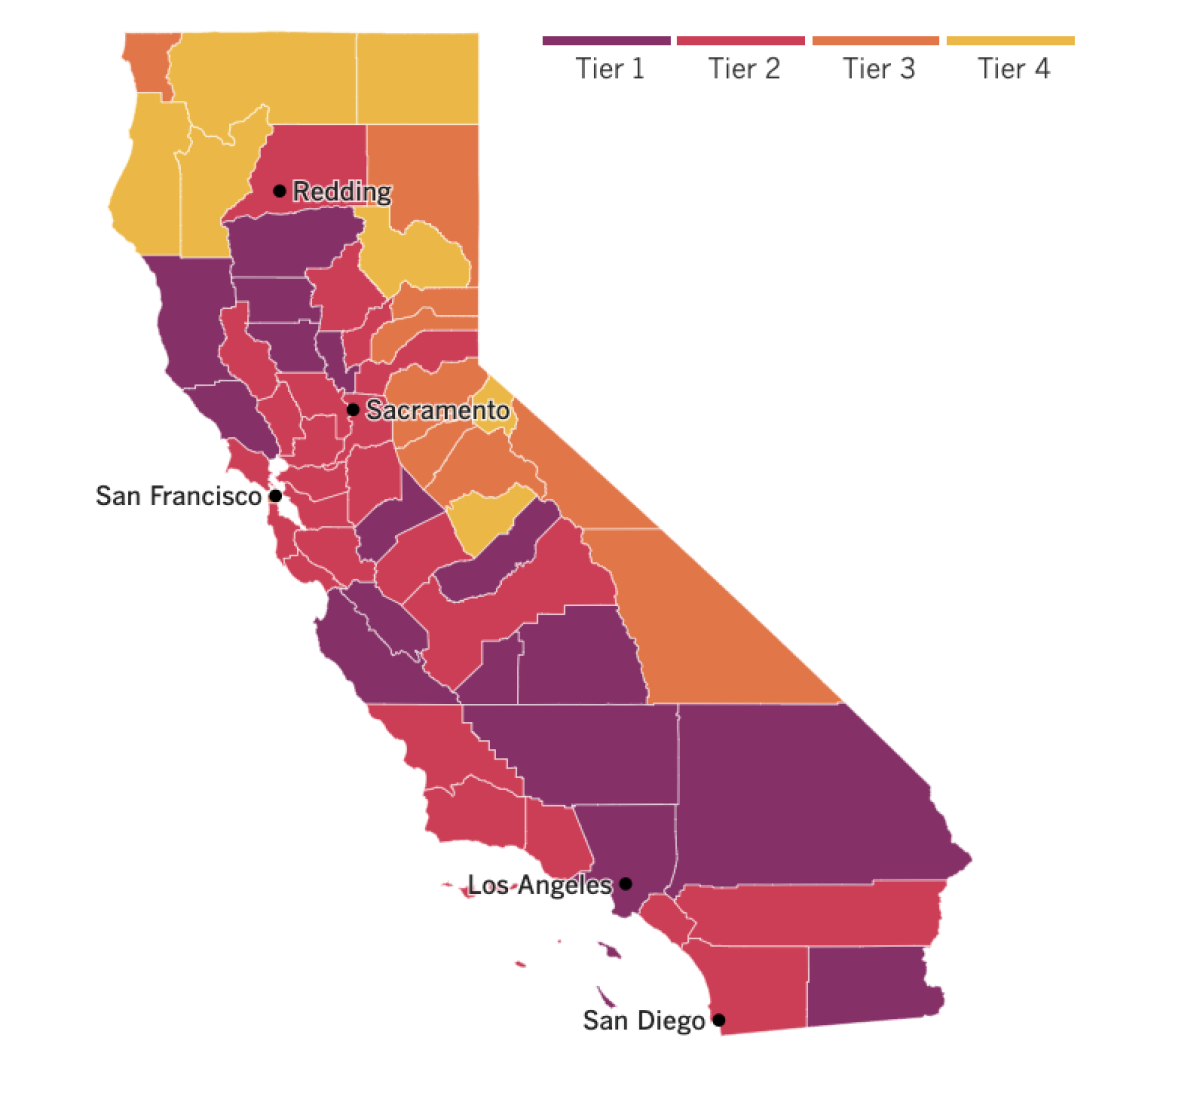 A map of California showing which tiers counties have been assigned to based on their local coronavirus transmission risk.